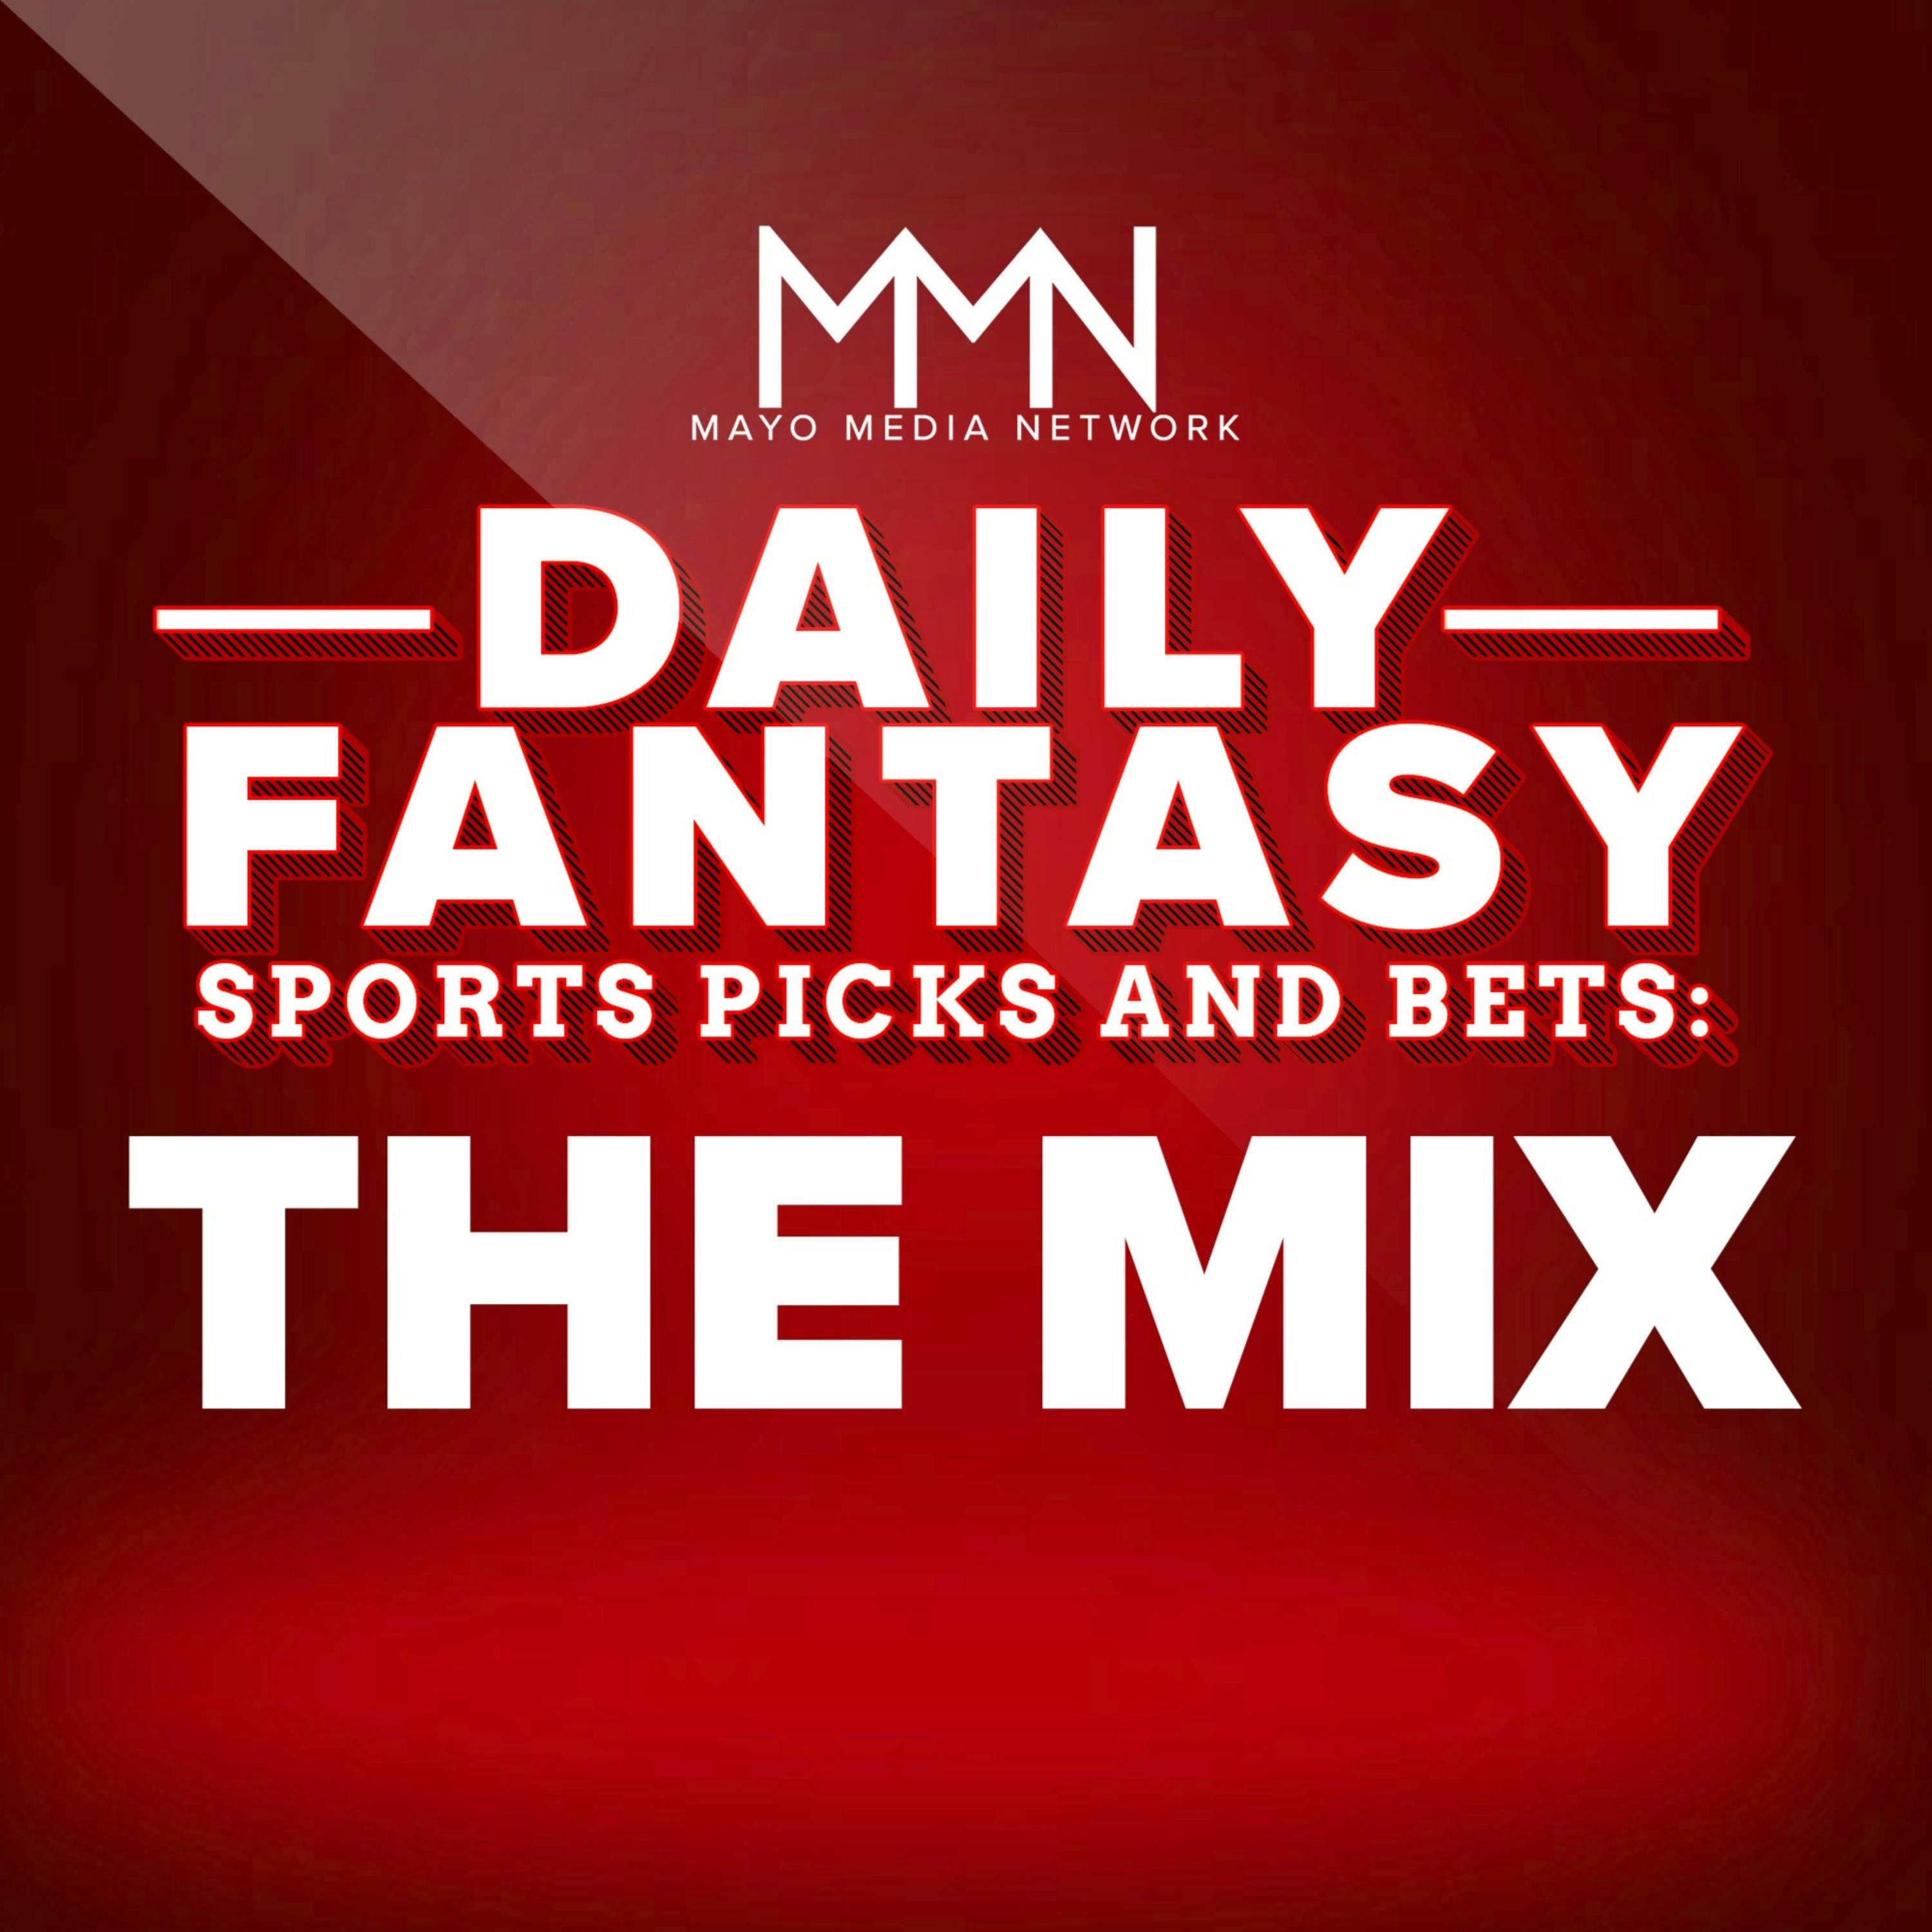 SOCCER - 5/29 - UCL FINAL Man City vs Chelsea - DraftKings Picks & Bets